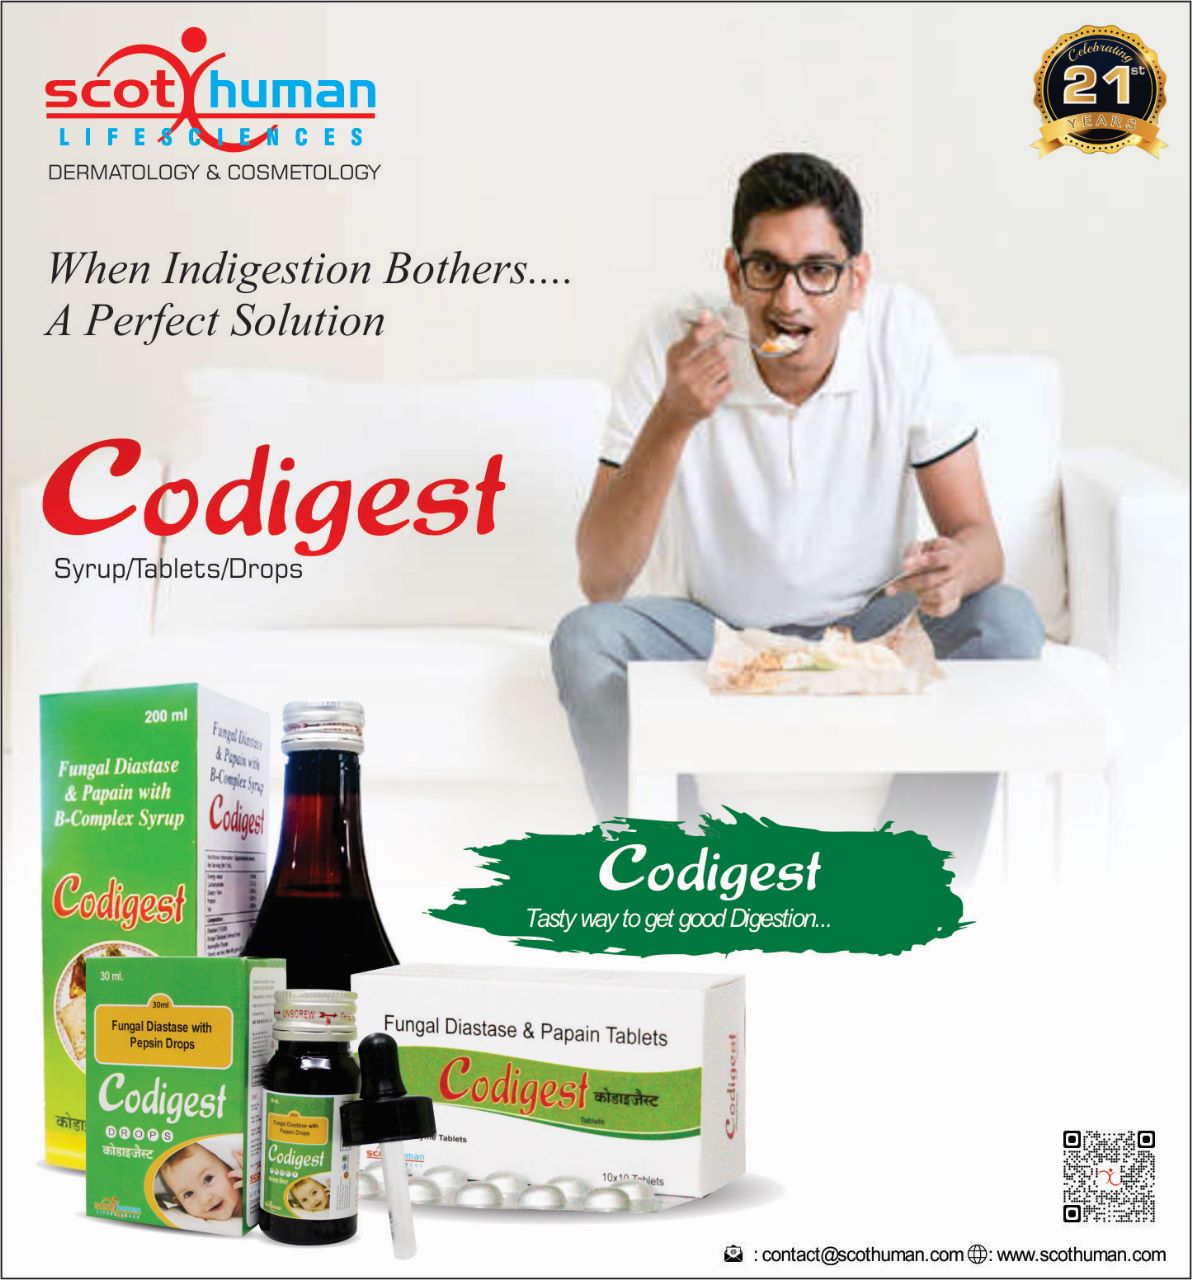 Product Name: Codigest, Compositions of Codigest are Fungal Diastase with Pepsin Syrup - Pharma Drugs and Chemicals